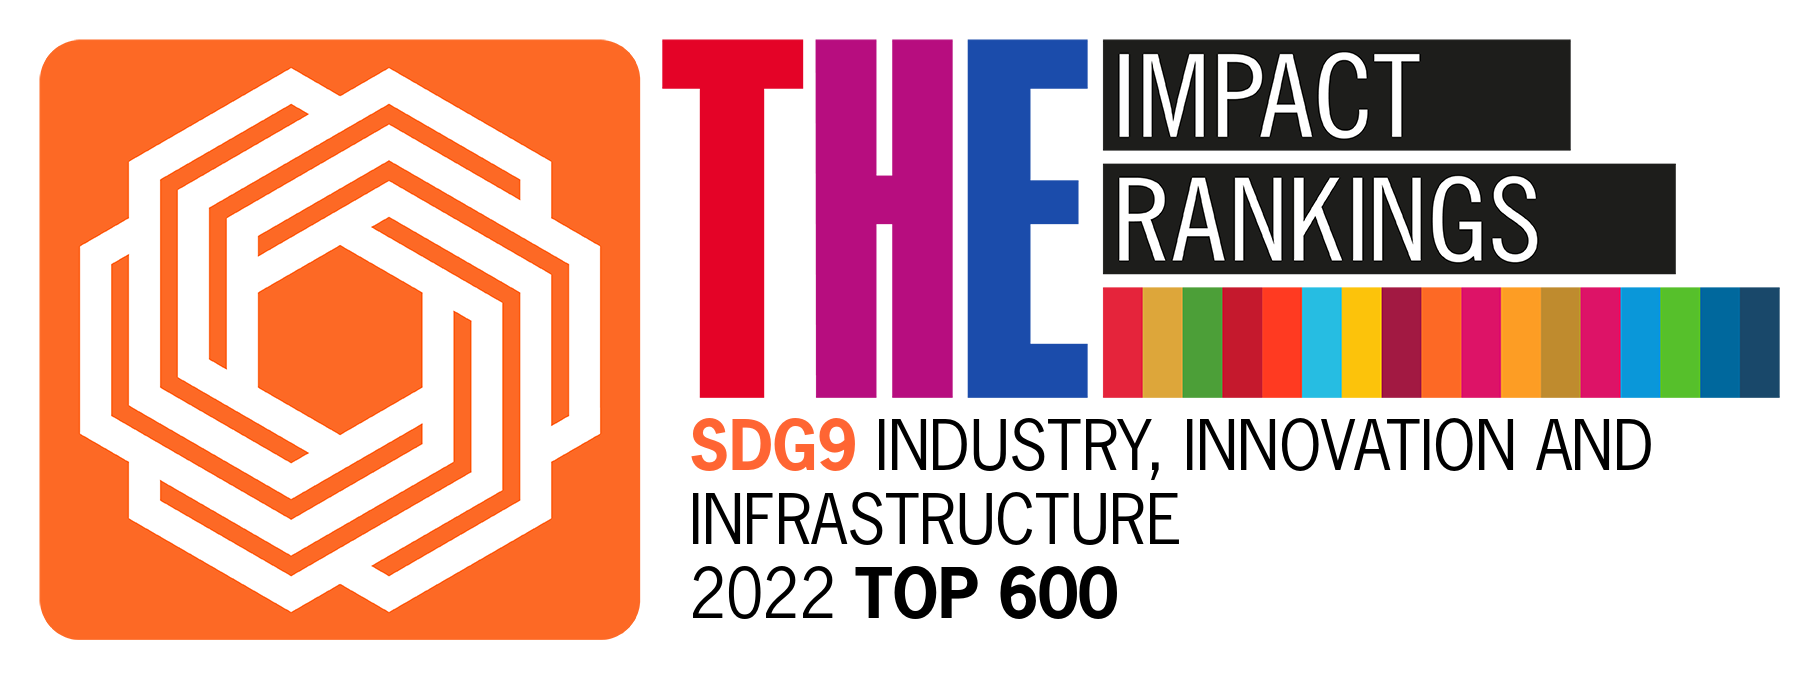 SDG9_ Industry, Innovation and Infrastructure - Top 600